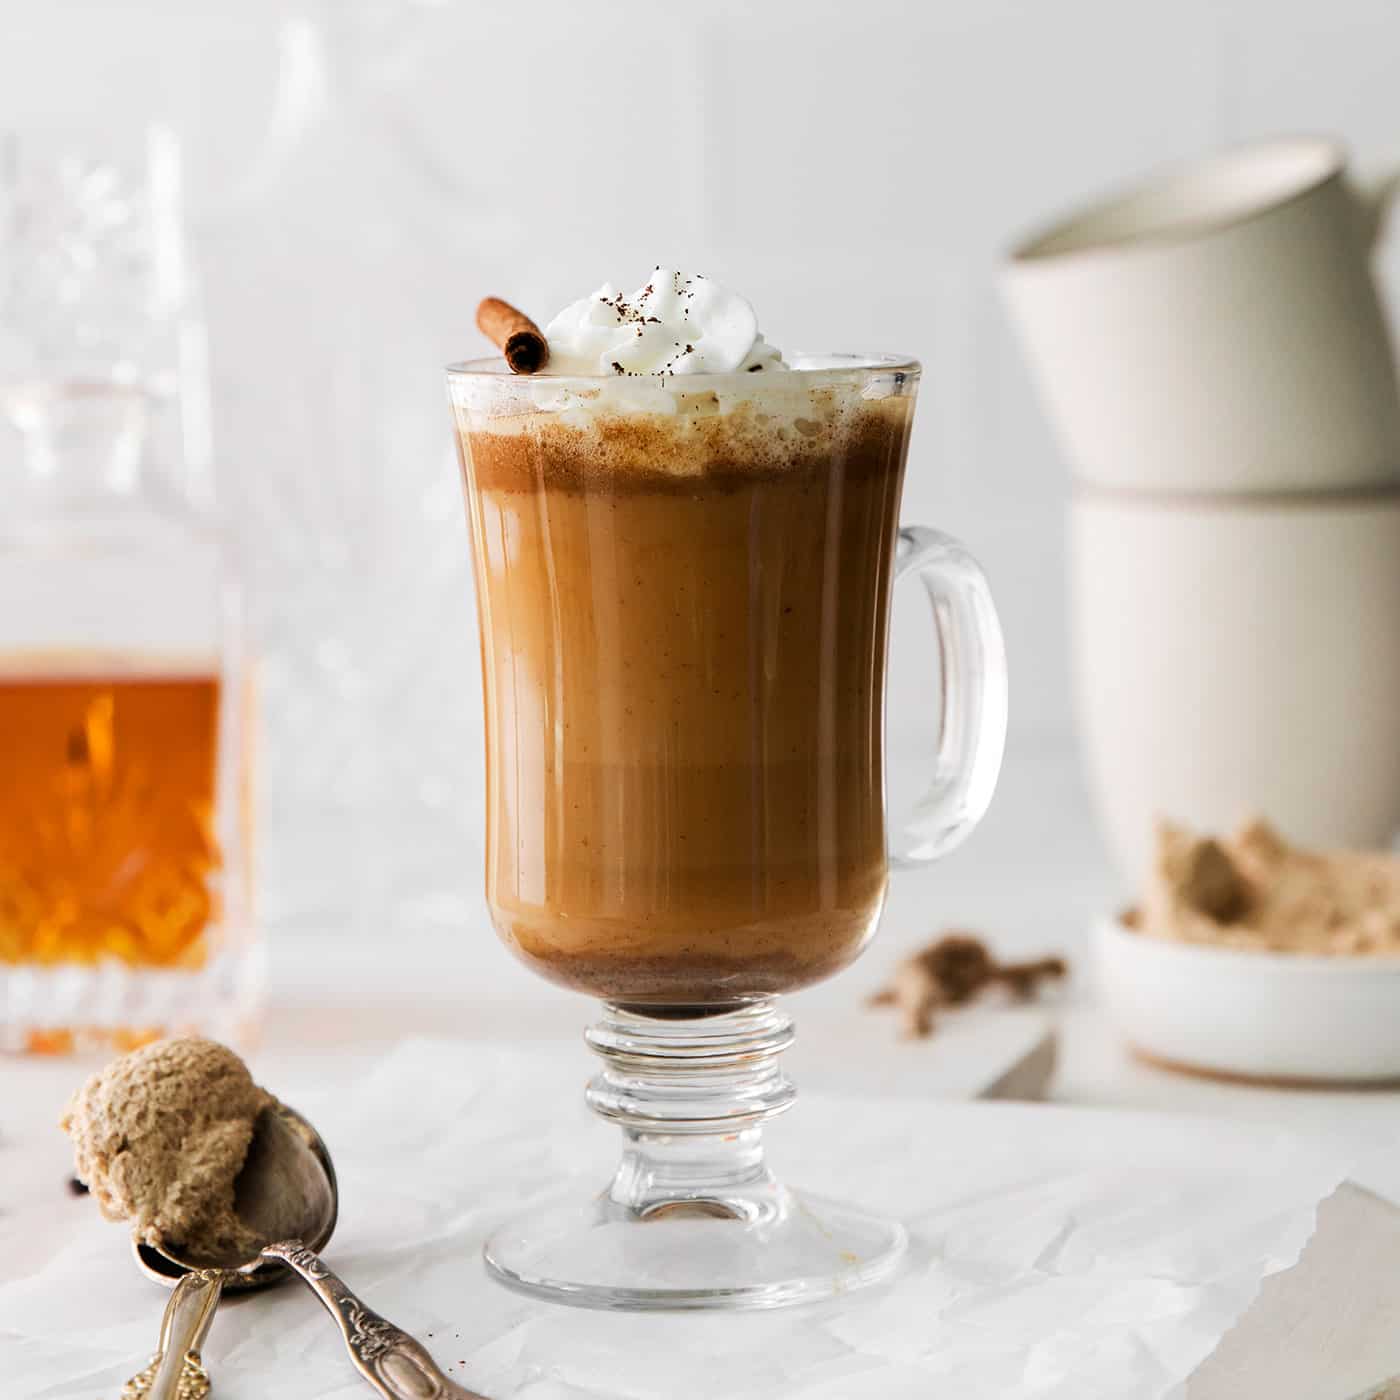 A hot buttered rum coffee garnished with whipped cream